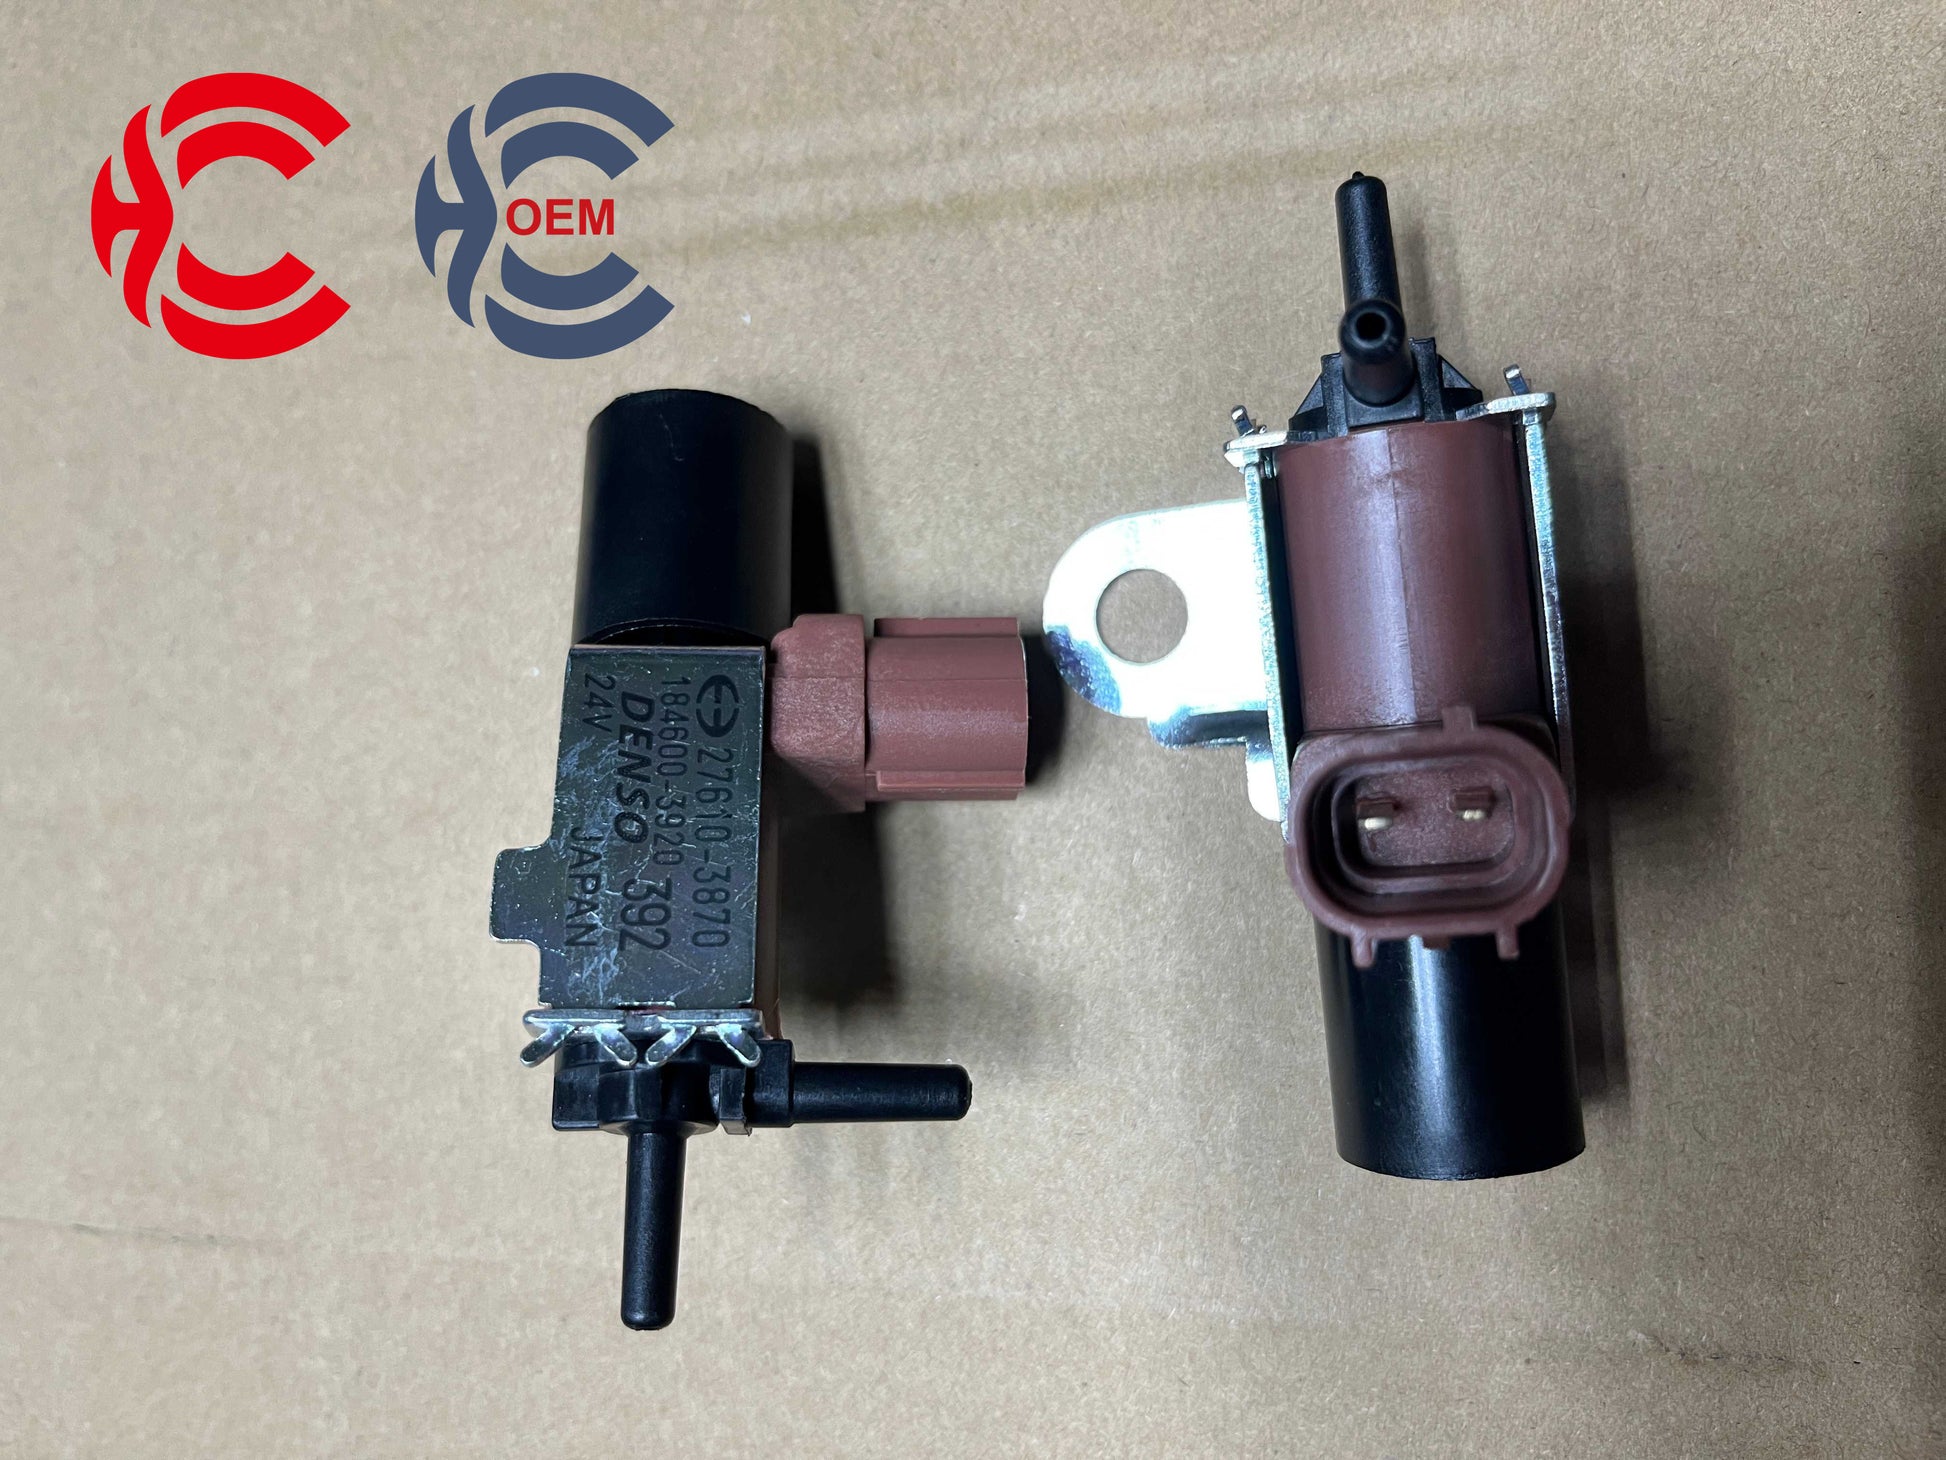 OEM: 27610-3870 184600-3920 Material: ABS Color: black Origin: Made in China Weight: 150g Packing List: 1*  VNT Solenoid Valve  More Service We can provide OEM Manufacturing service We can Be your one-step solution for Auto Parts We can provide technical scheme for you  Feel Free to Contact Us, We will get back to you as soon as possible.